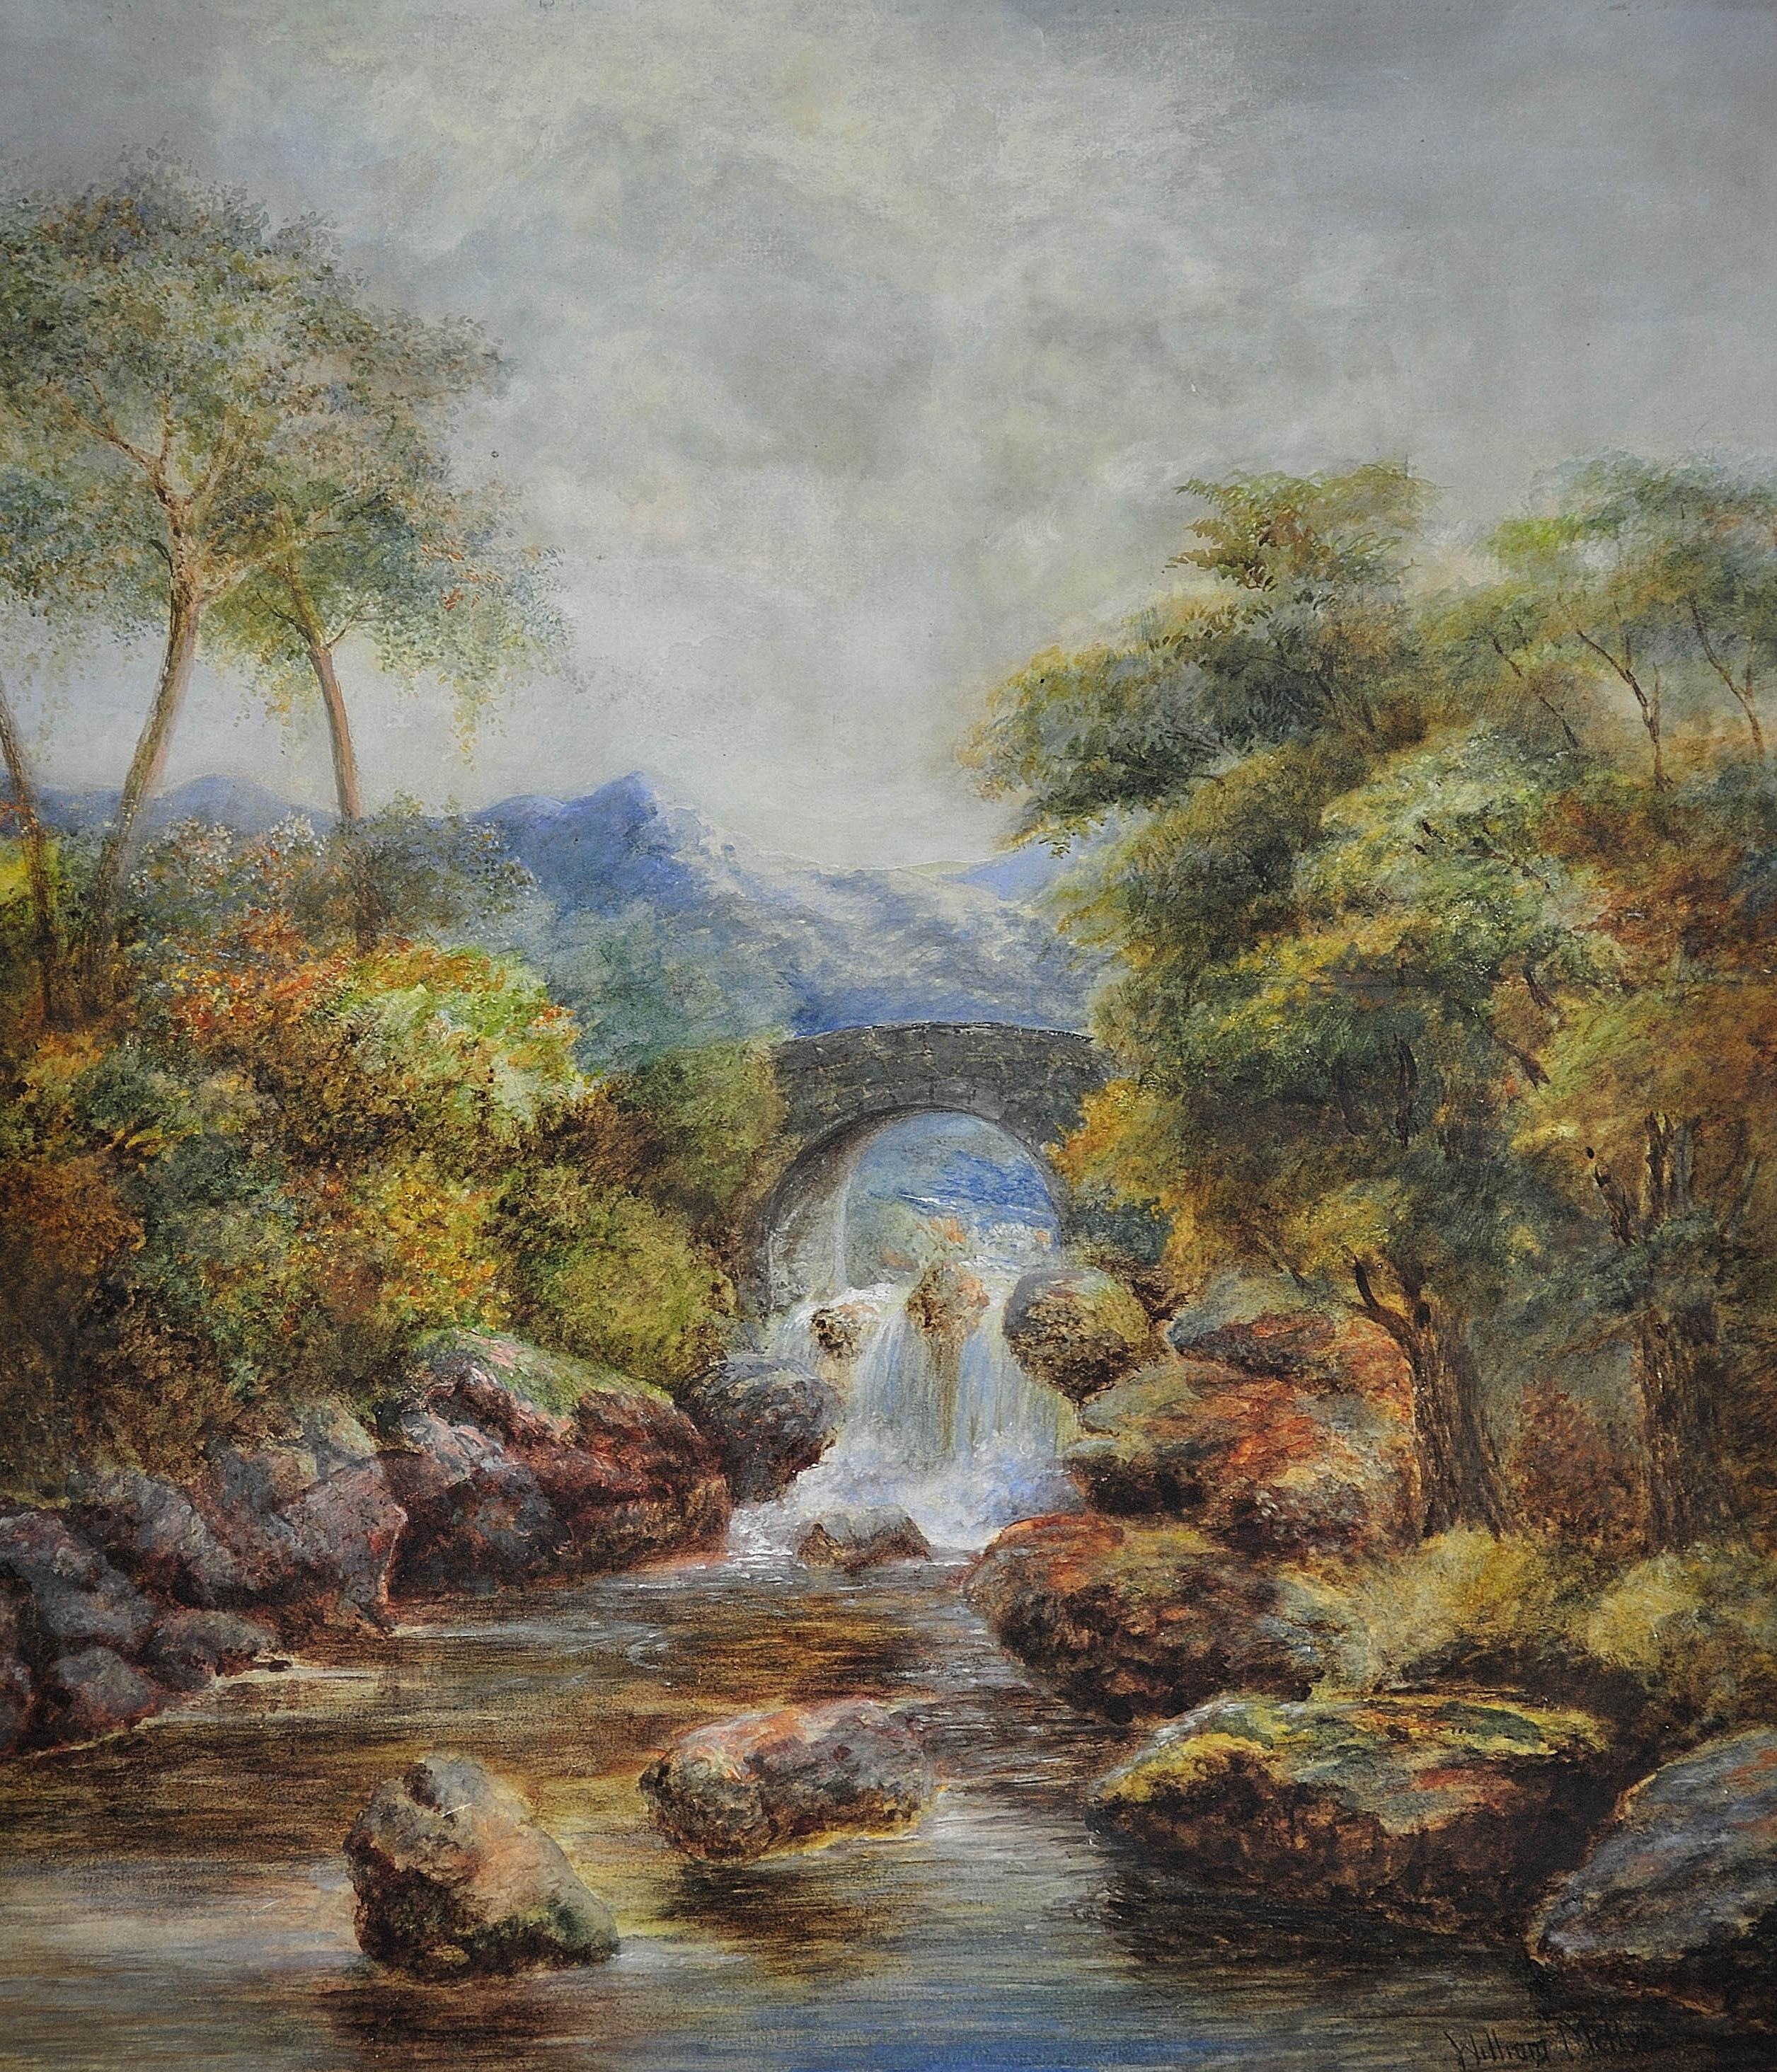 Waterfall & Stone Bridge on the River Llugwy, near Capel Curig. Victorian Wales - Art by William Mellor